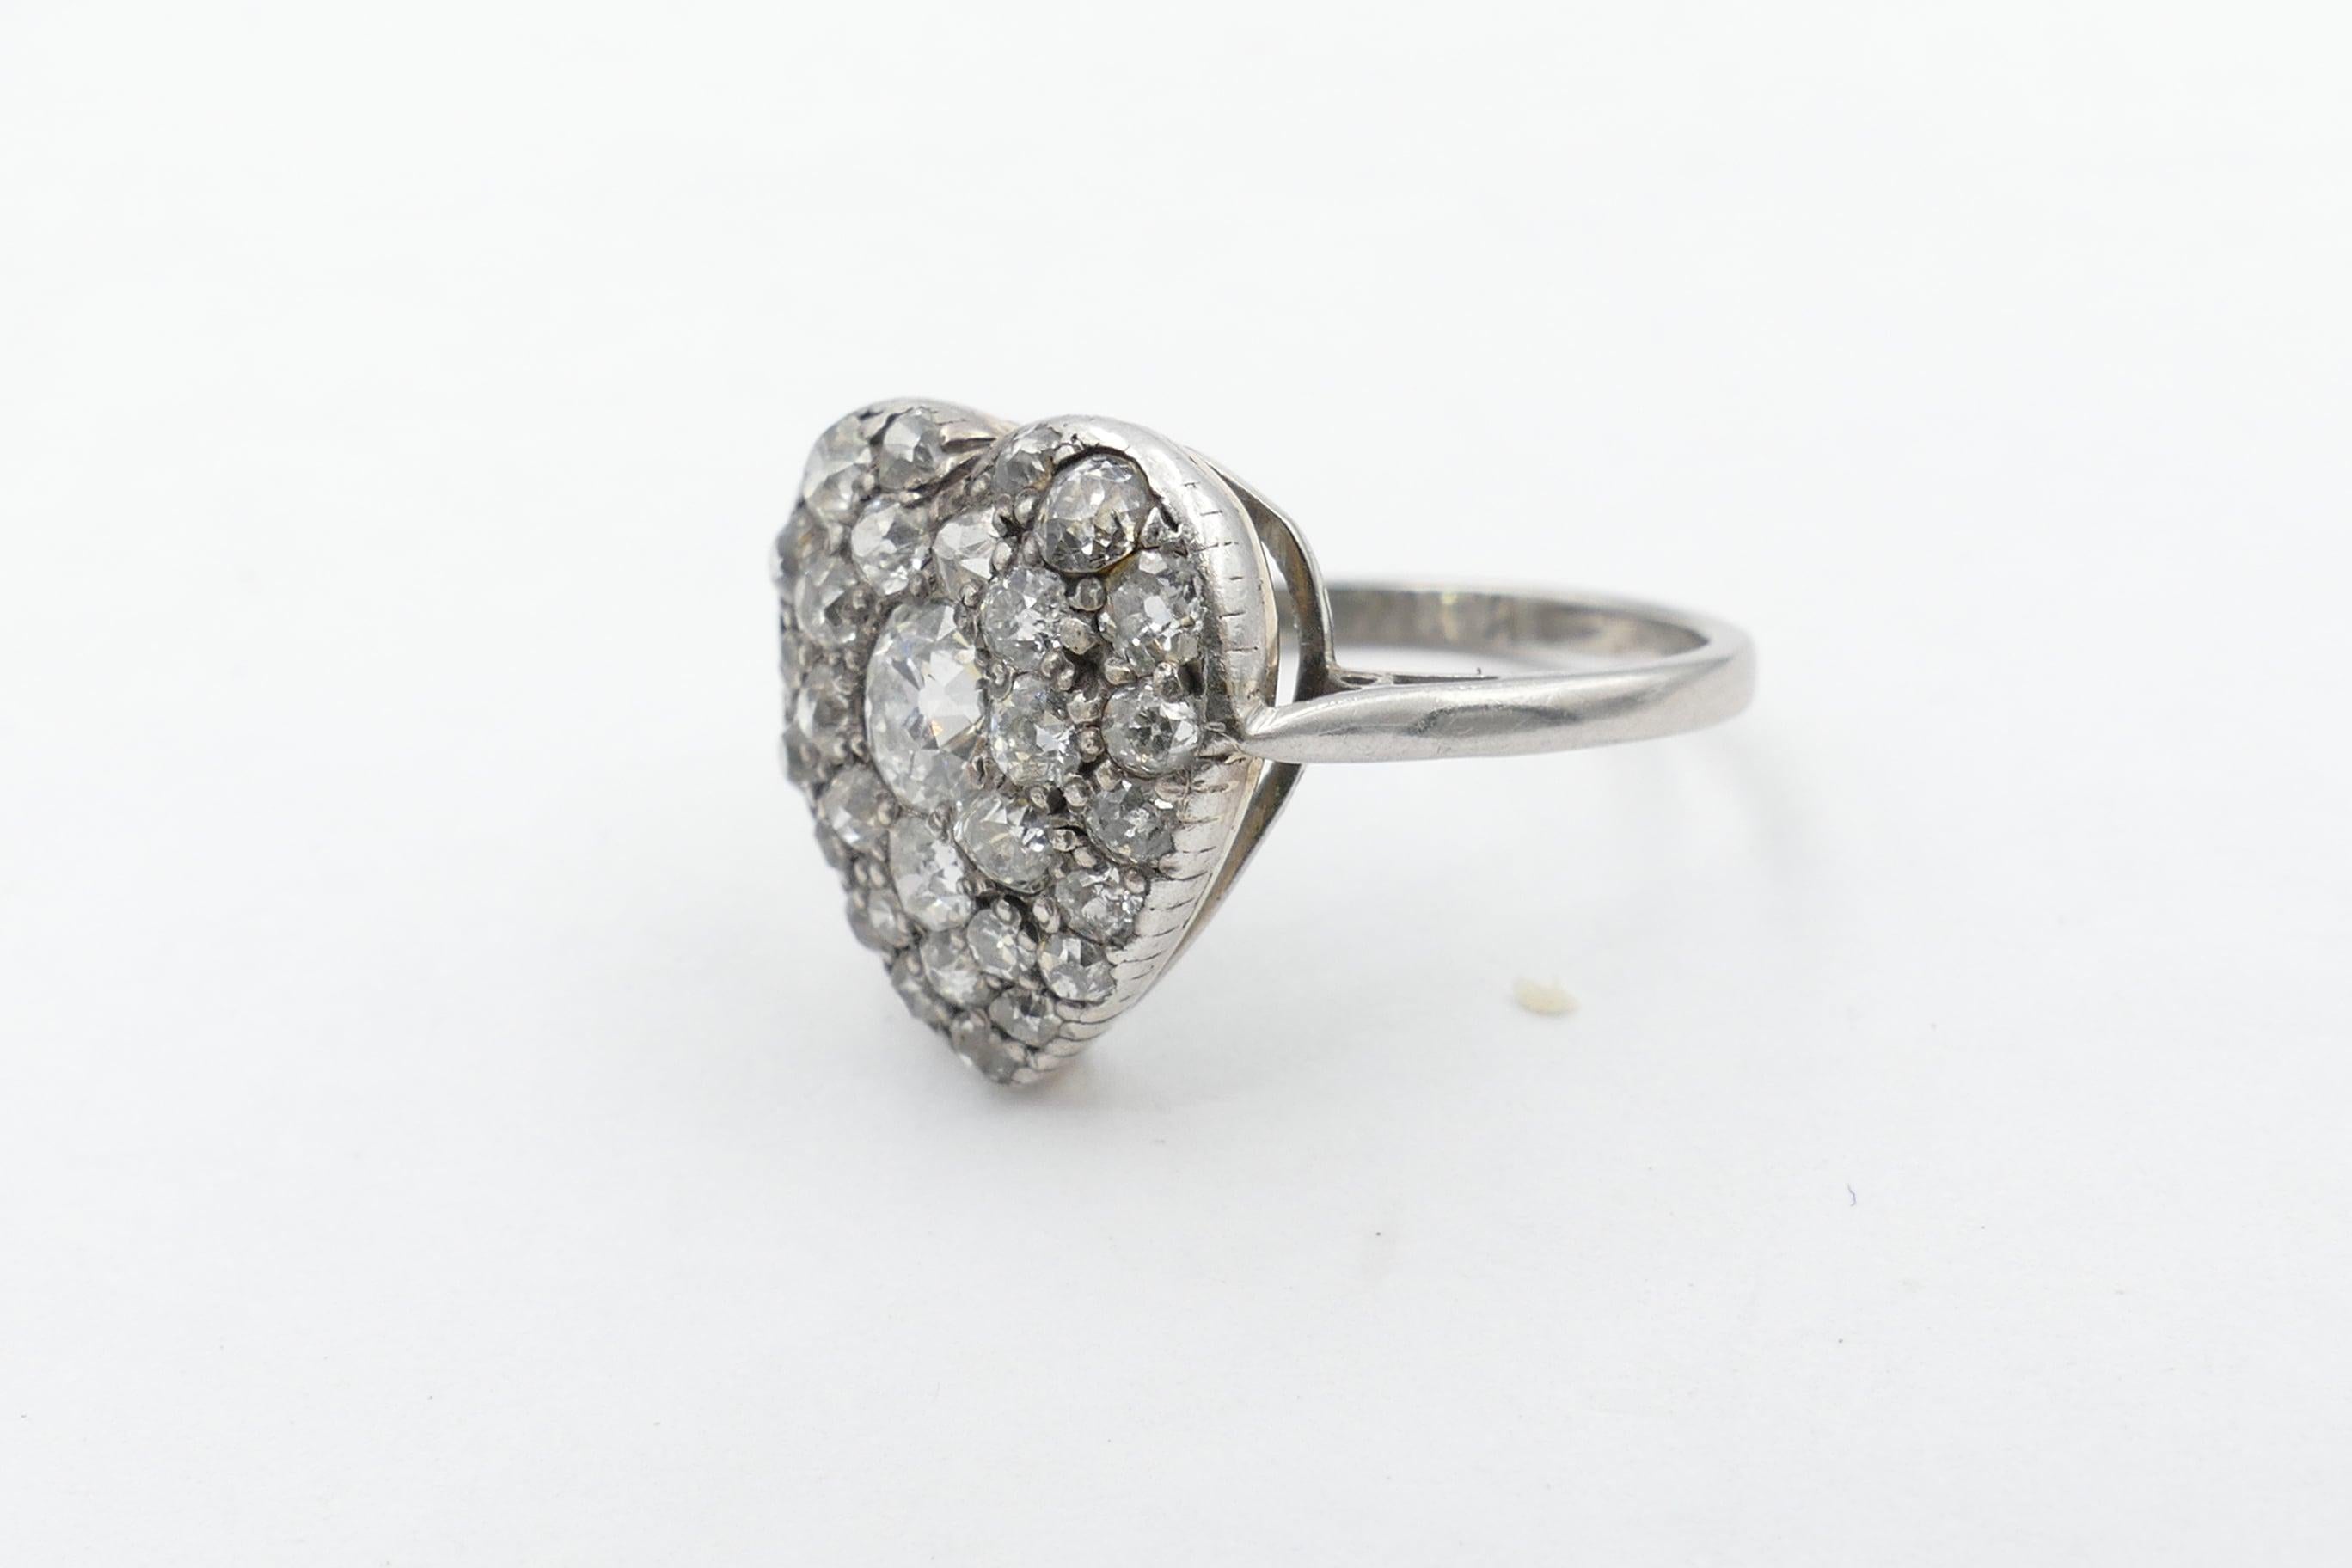 The Centrepiece of this beautiful Antique Heart Shaped Diamond Ring is one Old EuropeanCut Diamond 4.10 X 4.28 X 2.86mm, Colour G, Clarity SI1. It is surrounded by 6 Old European Single Cut Diamonds, Colour G/I & Clarity SI1-I1 & Bead Set.
The Band